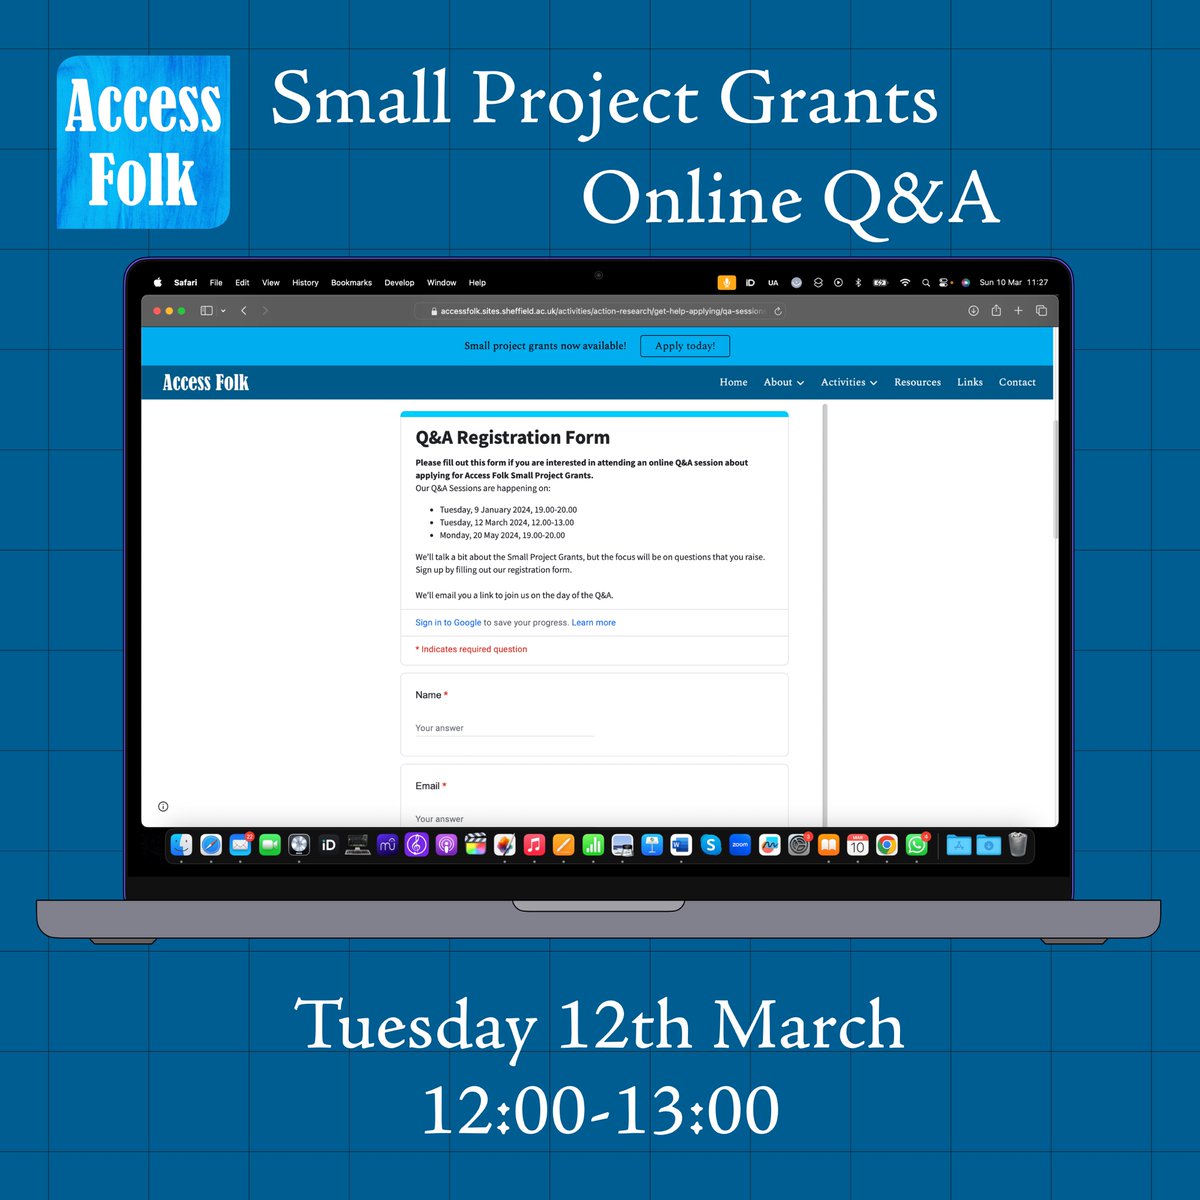 We’re offering an online Q&A session on our Small Project Grants this Tuesday 12th March 12:00-13:00. Please sign up on our website accessfolk.sites.sheffield.ac.uk/activities/act… #folkmusic #folkgrants #musicgrants #smallprojects #musicprojects #folksinging #folksong #folksingers